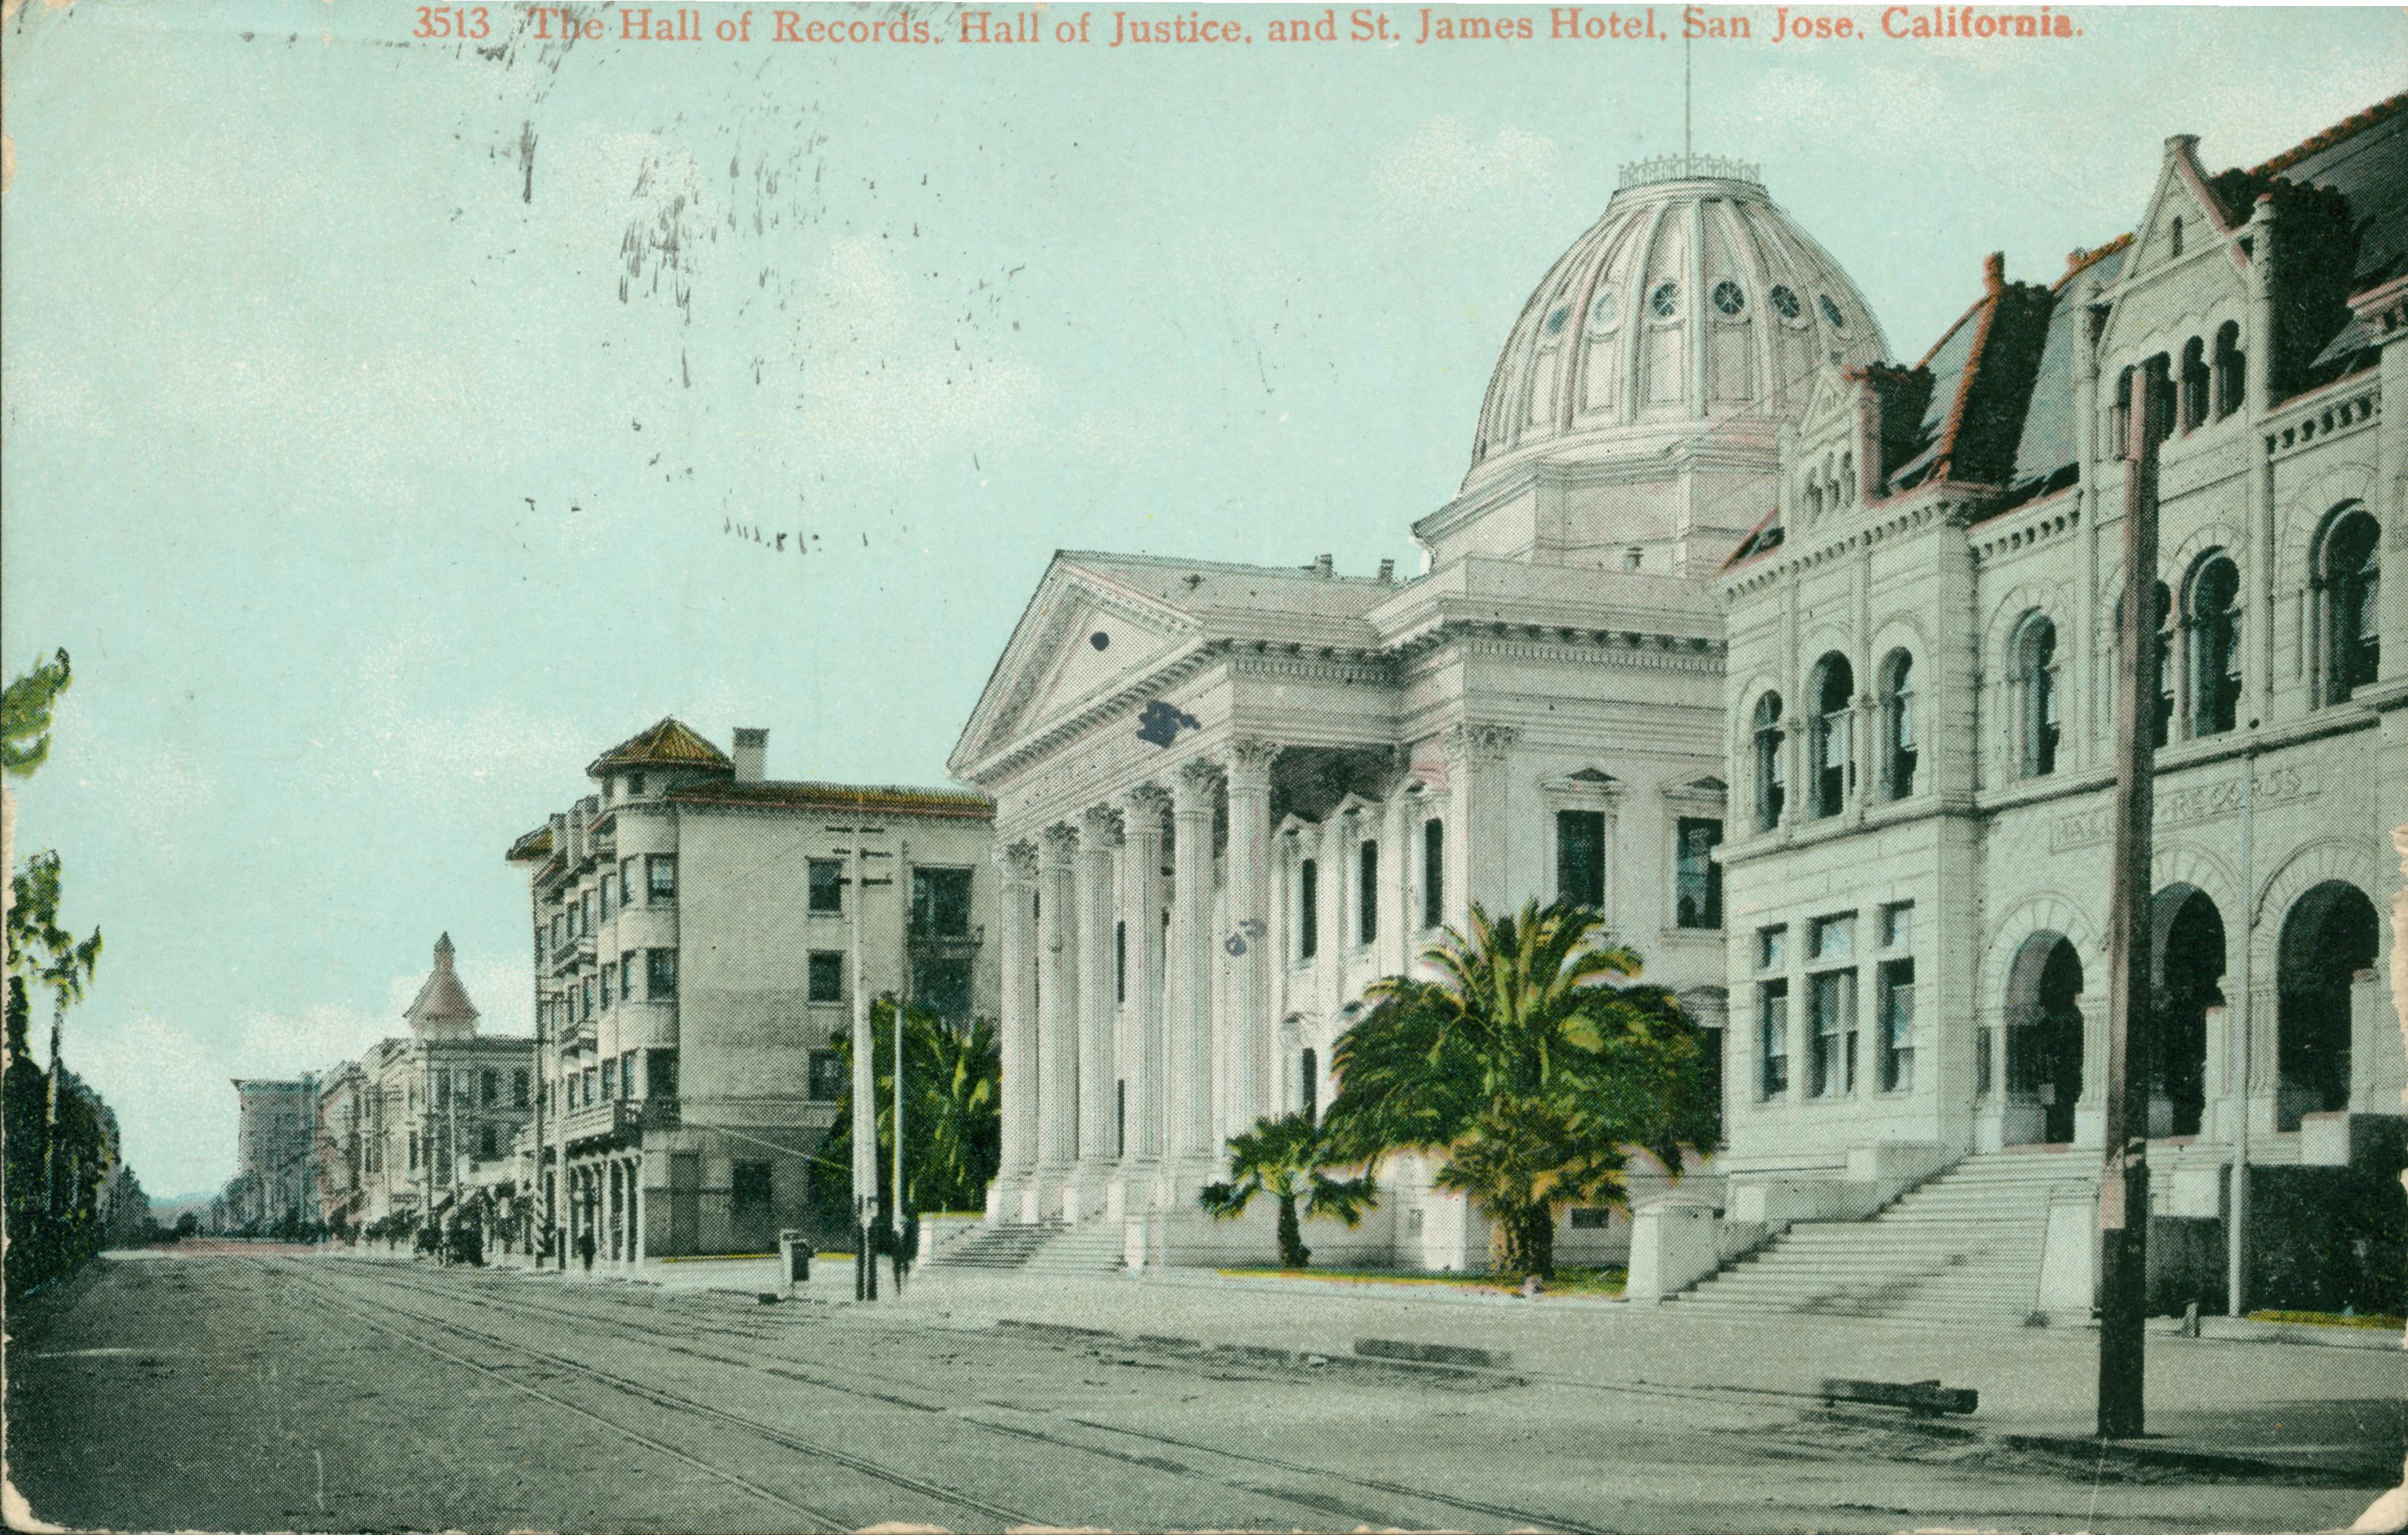 Exterior view of the Hall of Justice, Hall of Records and St. James Hotel, San Jose, California